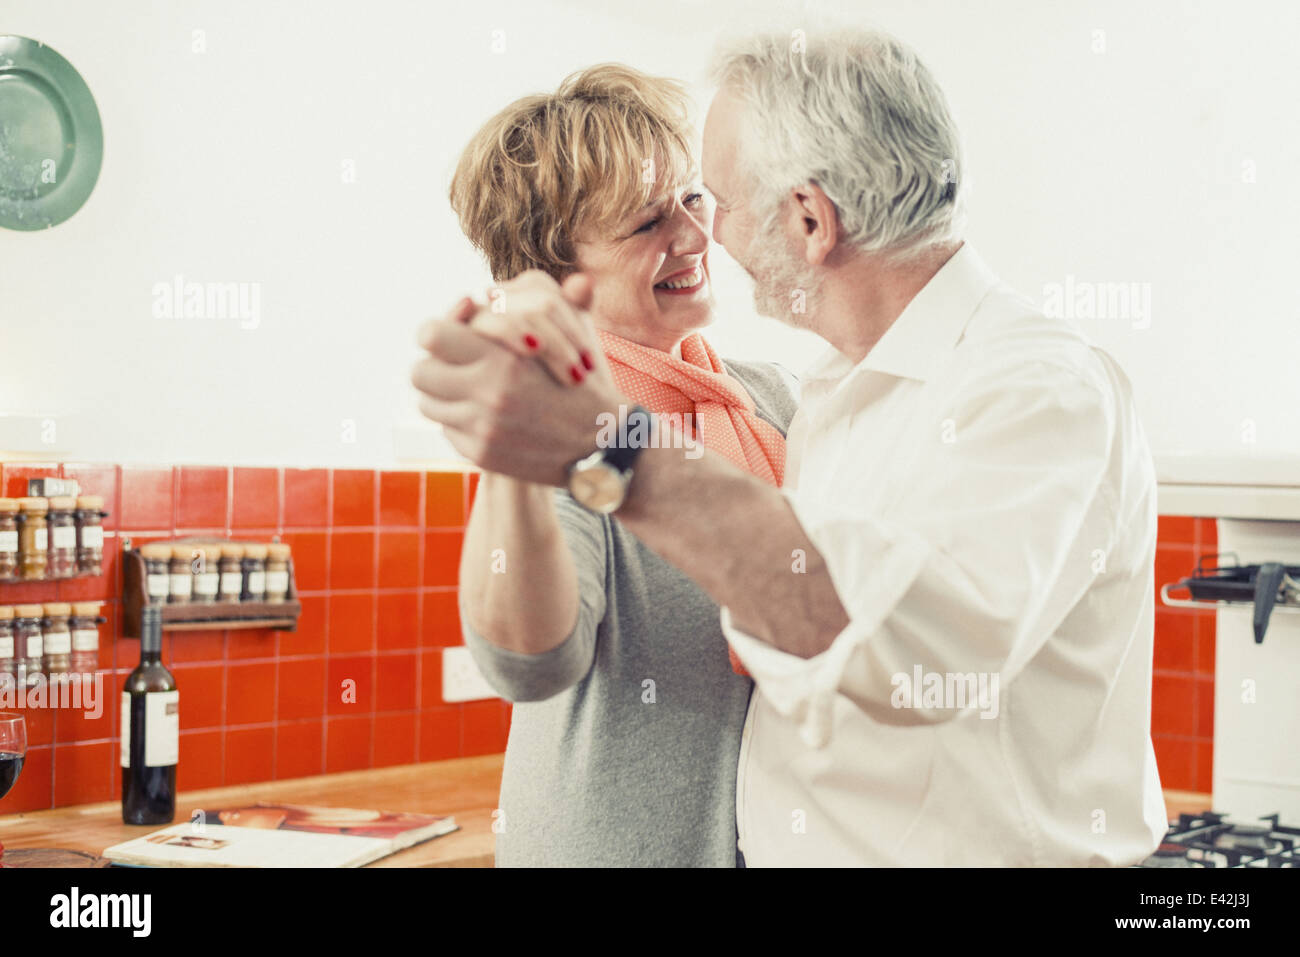 Couple dancing in kitchen Stock Photo